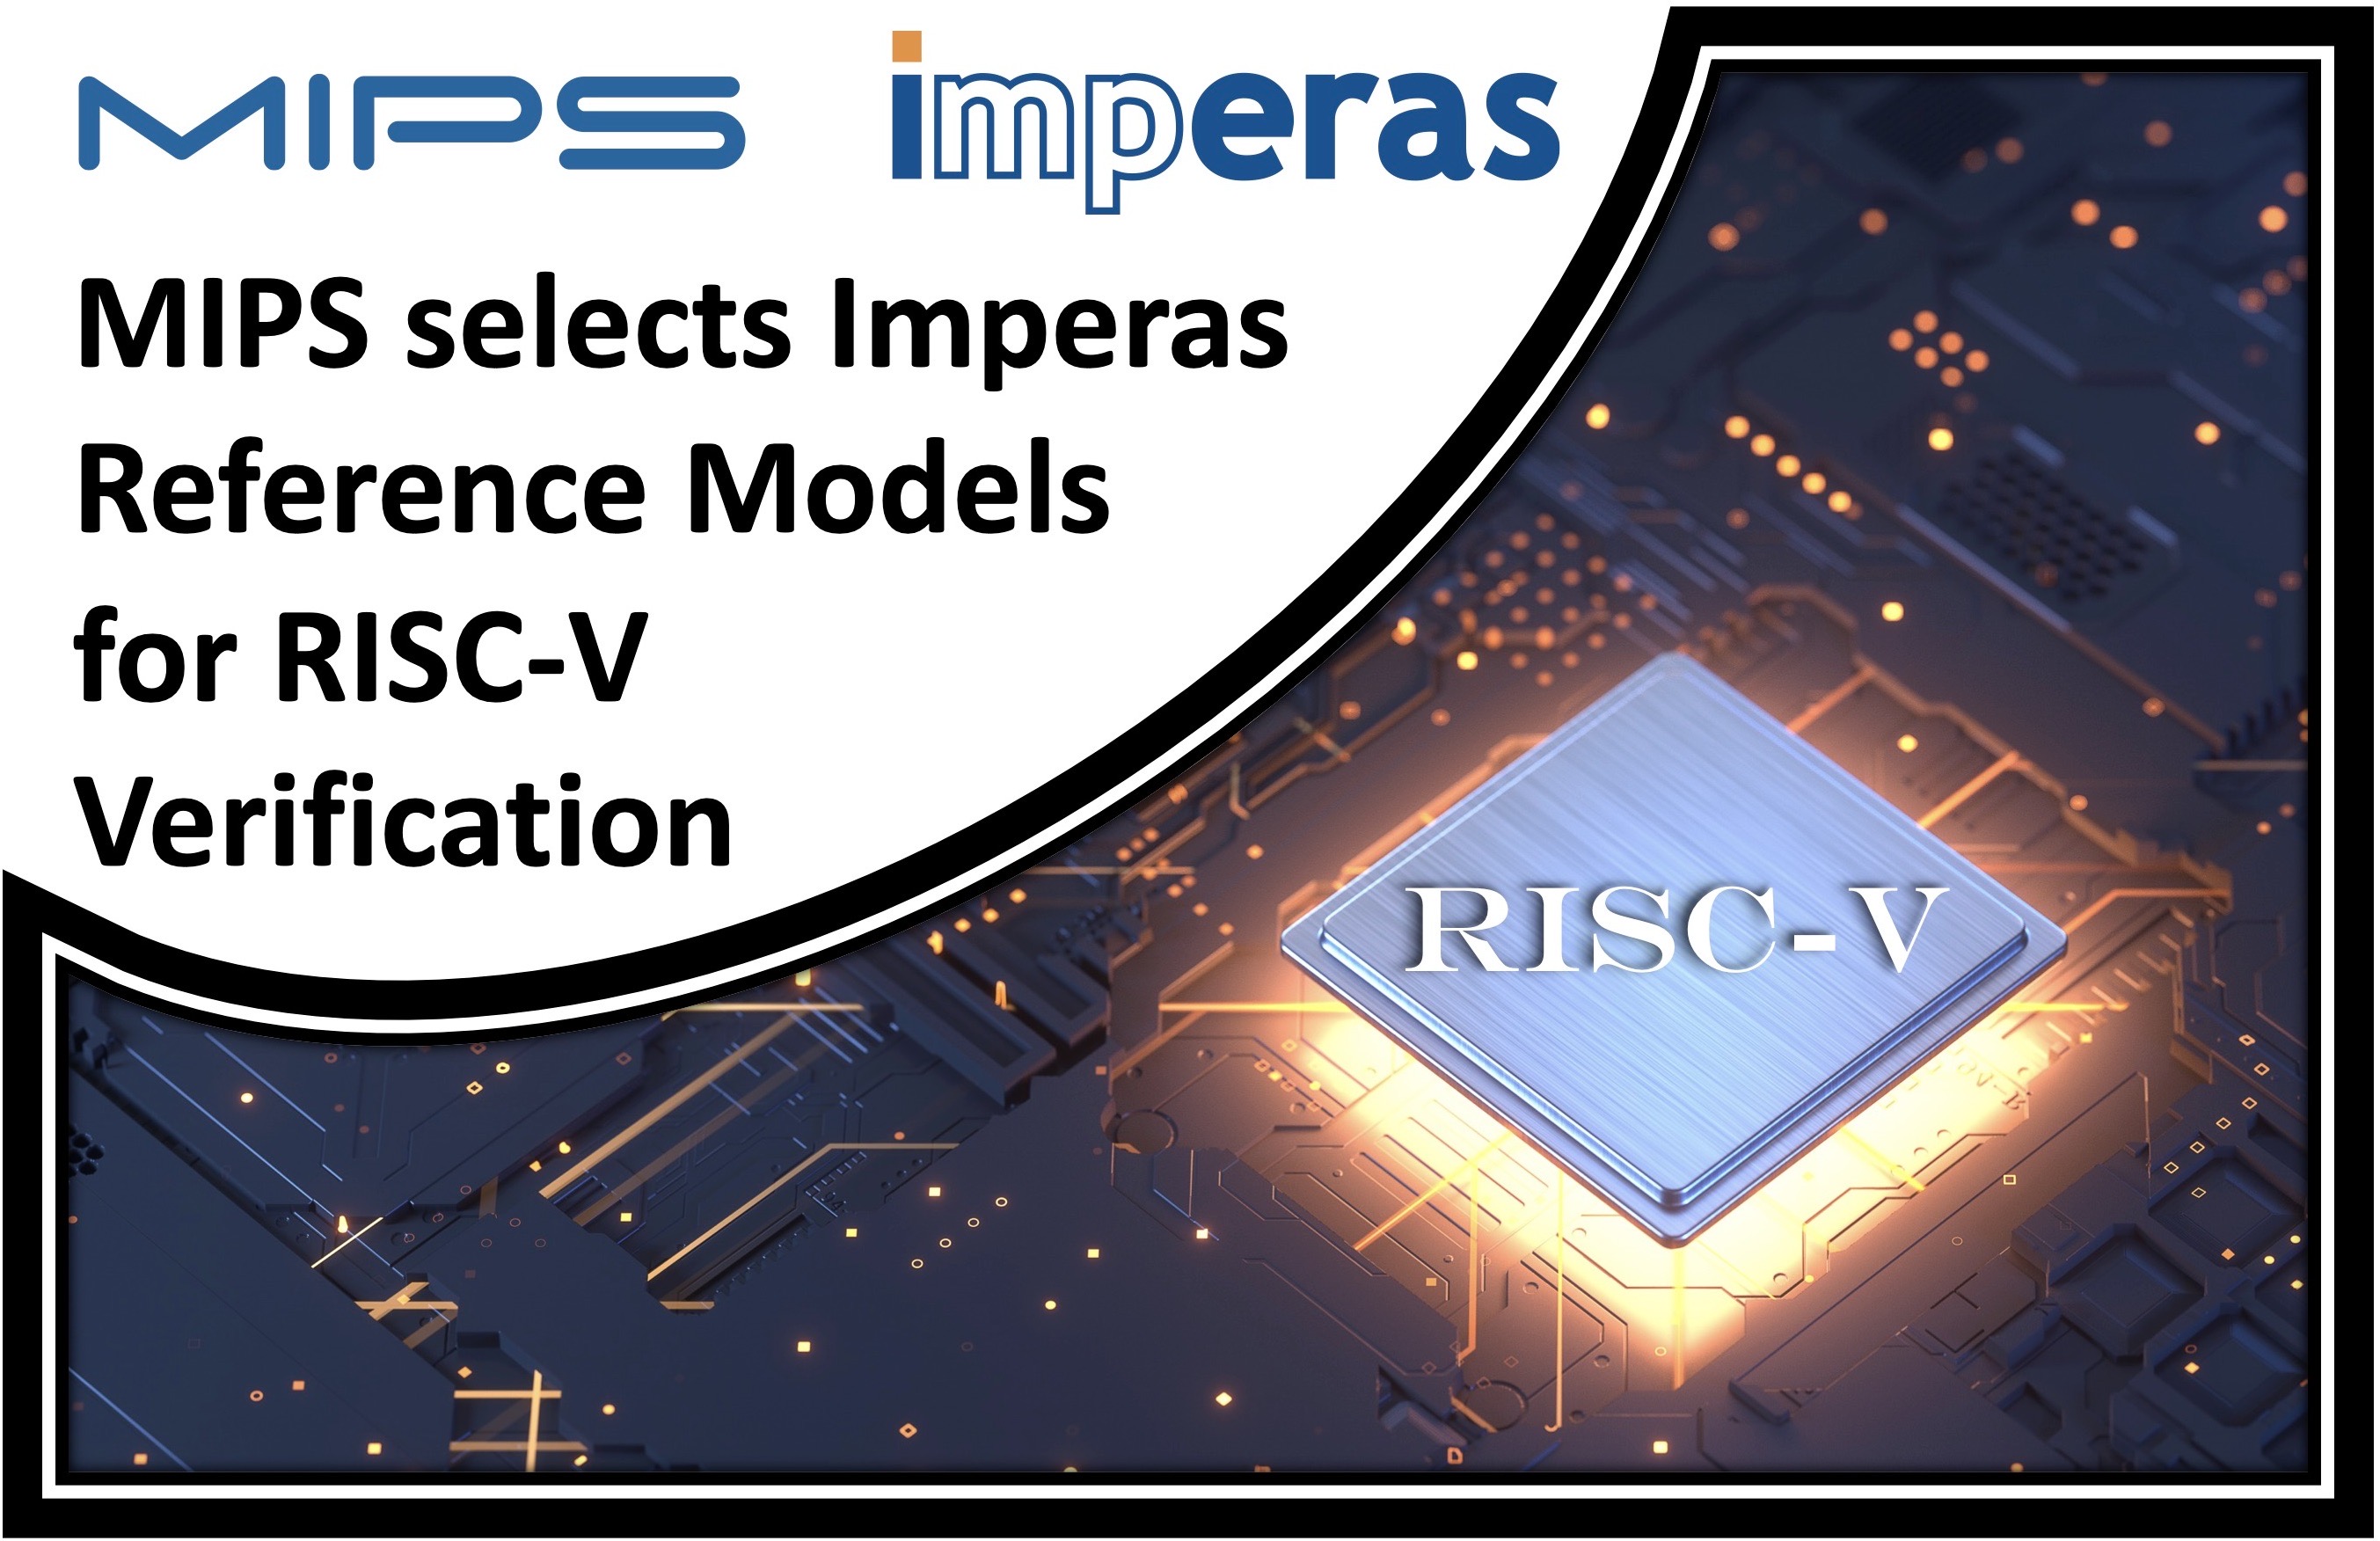 MIPS selects Imperas RISC-V processor verification